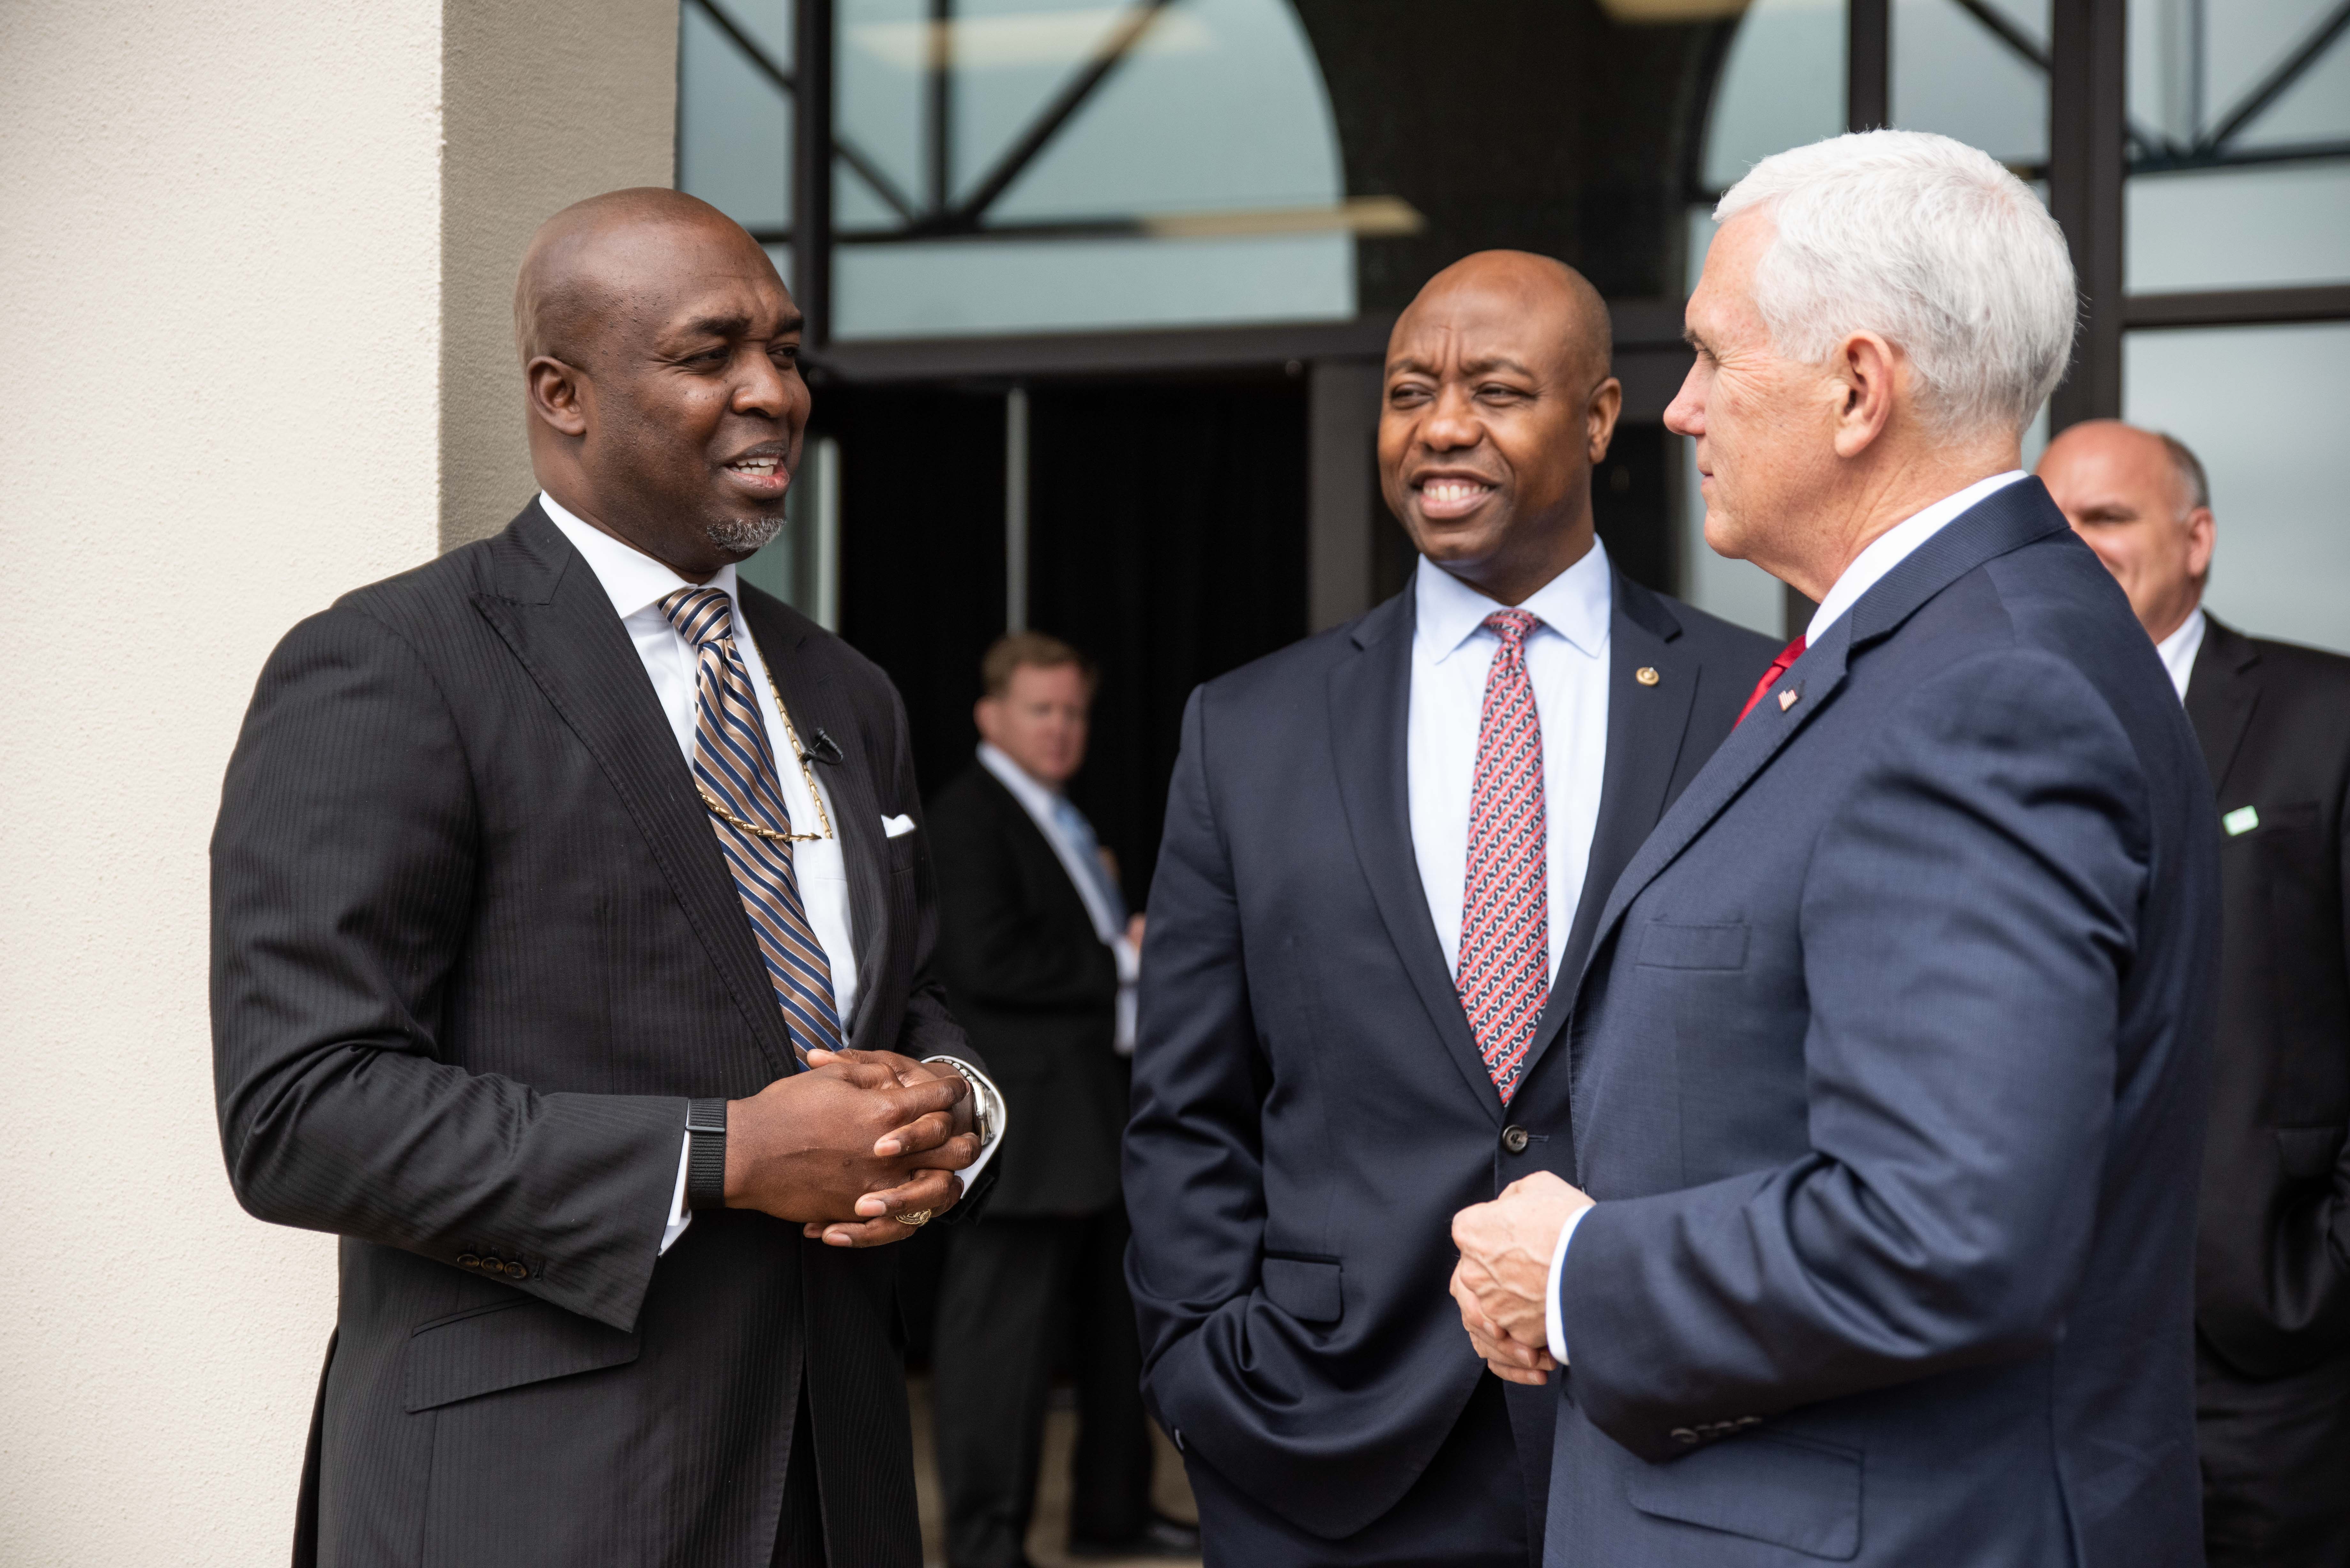 RELEASE – The Meeting Place Church Proud to Welcome Vice President Mike Pence, Senator Tim Scott